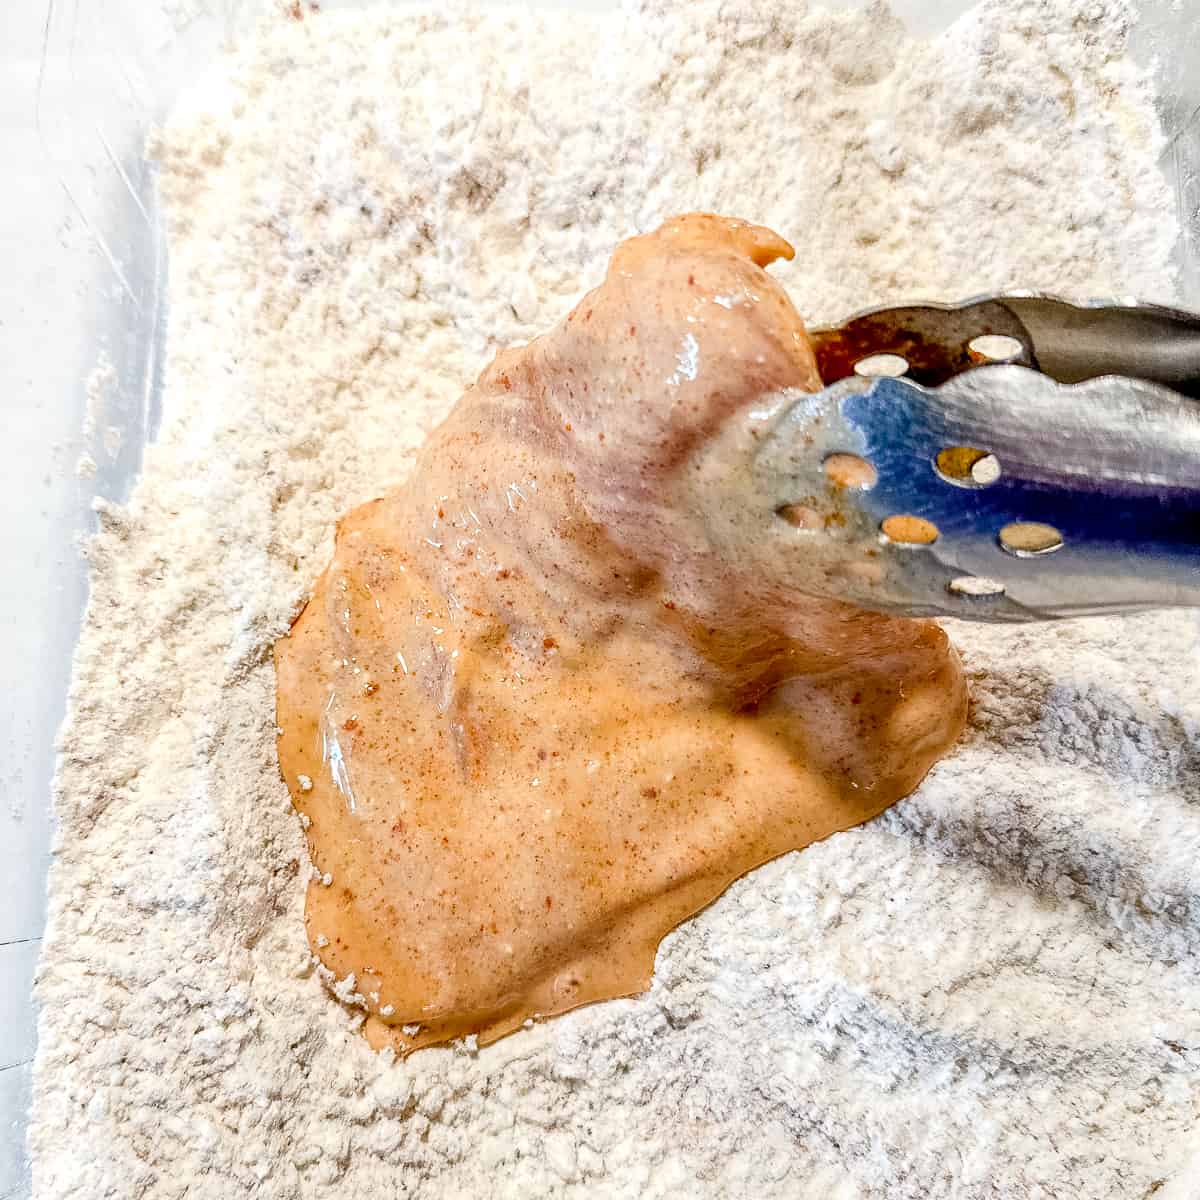 dredging a piece of chicken in flour and spices.